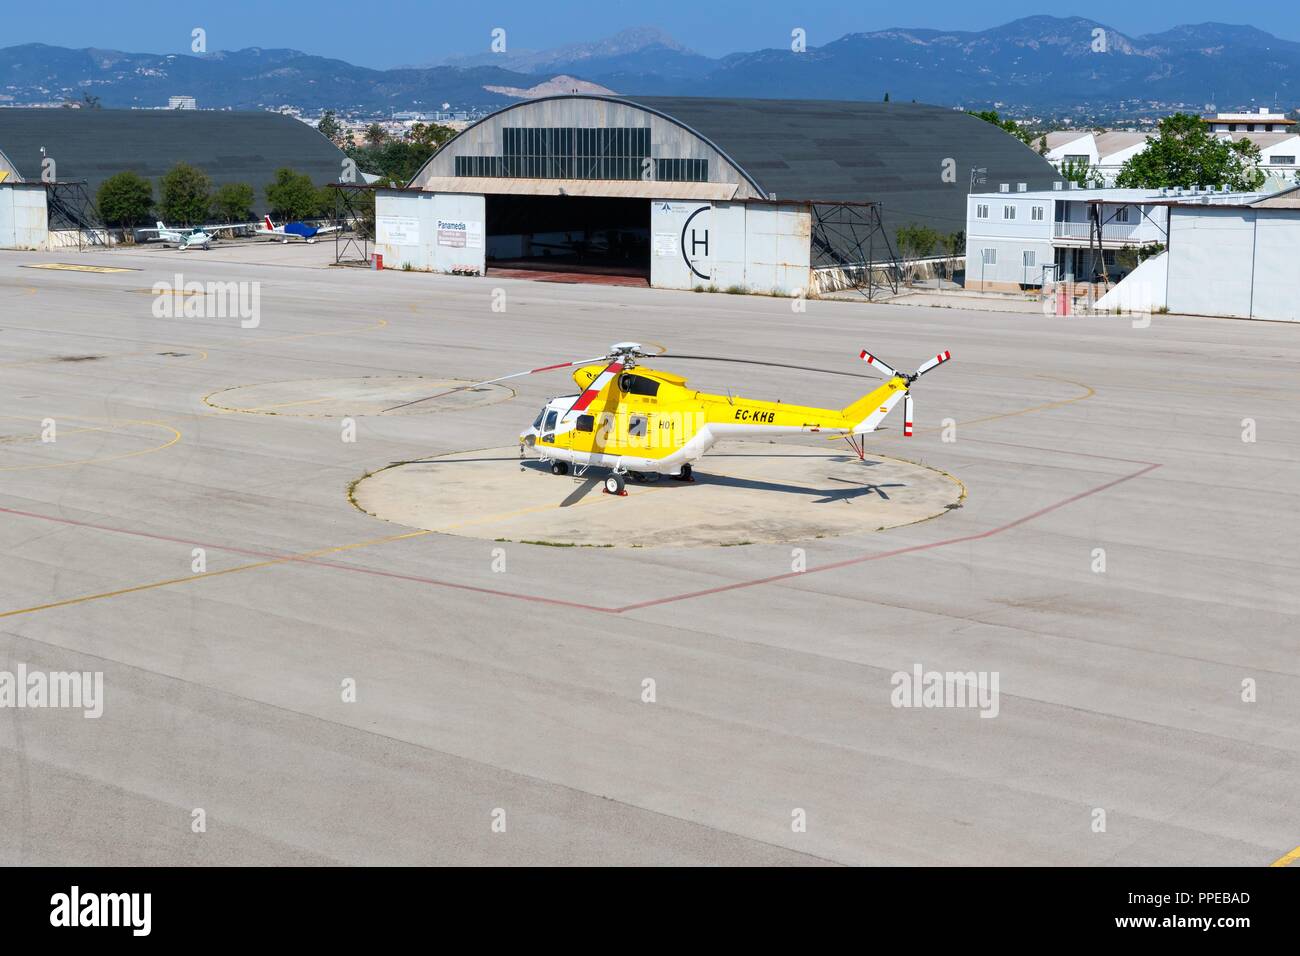 Palma de Mallorca, Spain - May 11, 2018: PZL-Swidnik W3 Soko  helicopter at Son Bonet airport in Spain. | usage worldwide Stock Photo